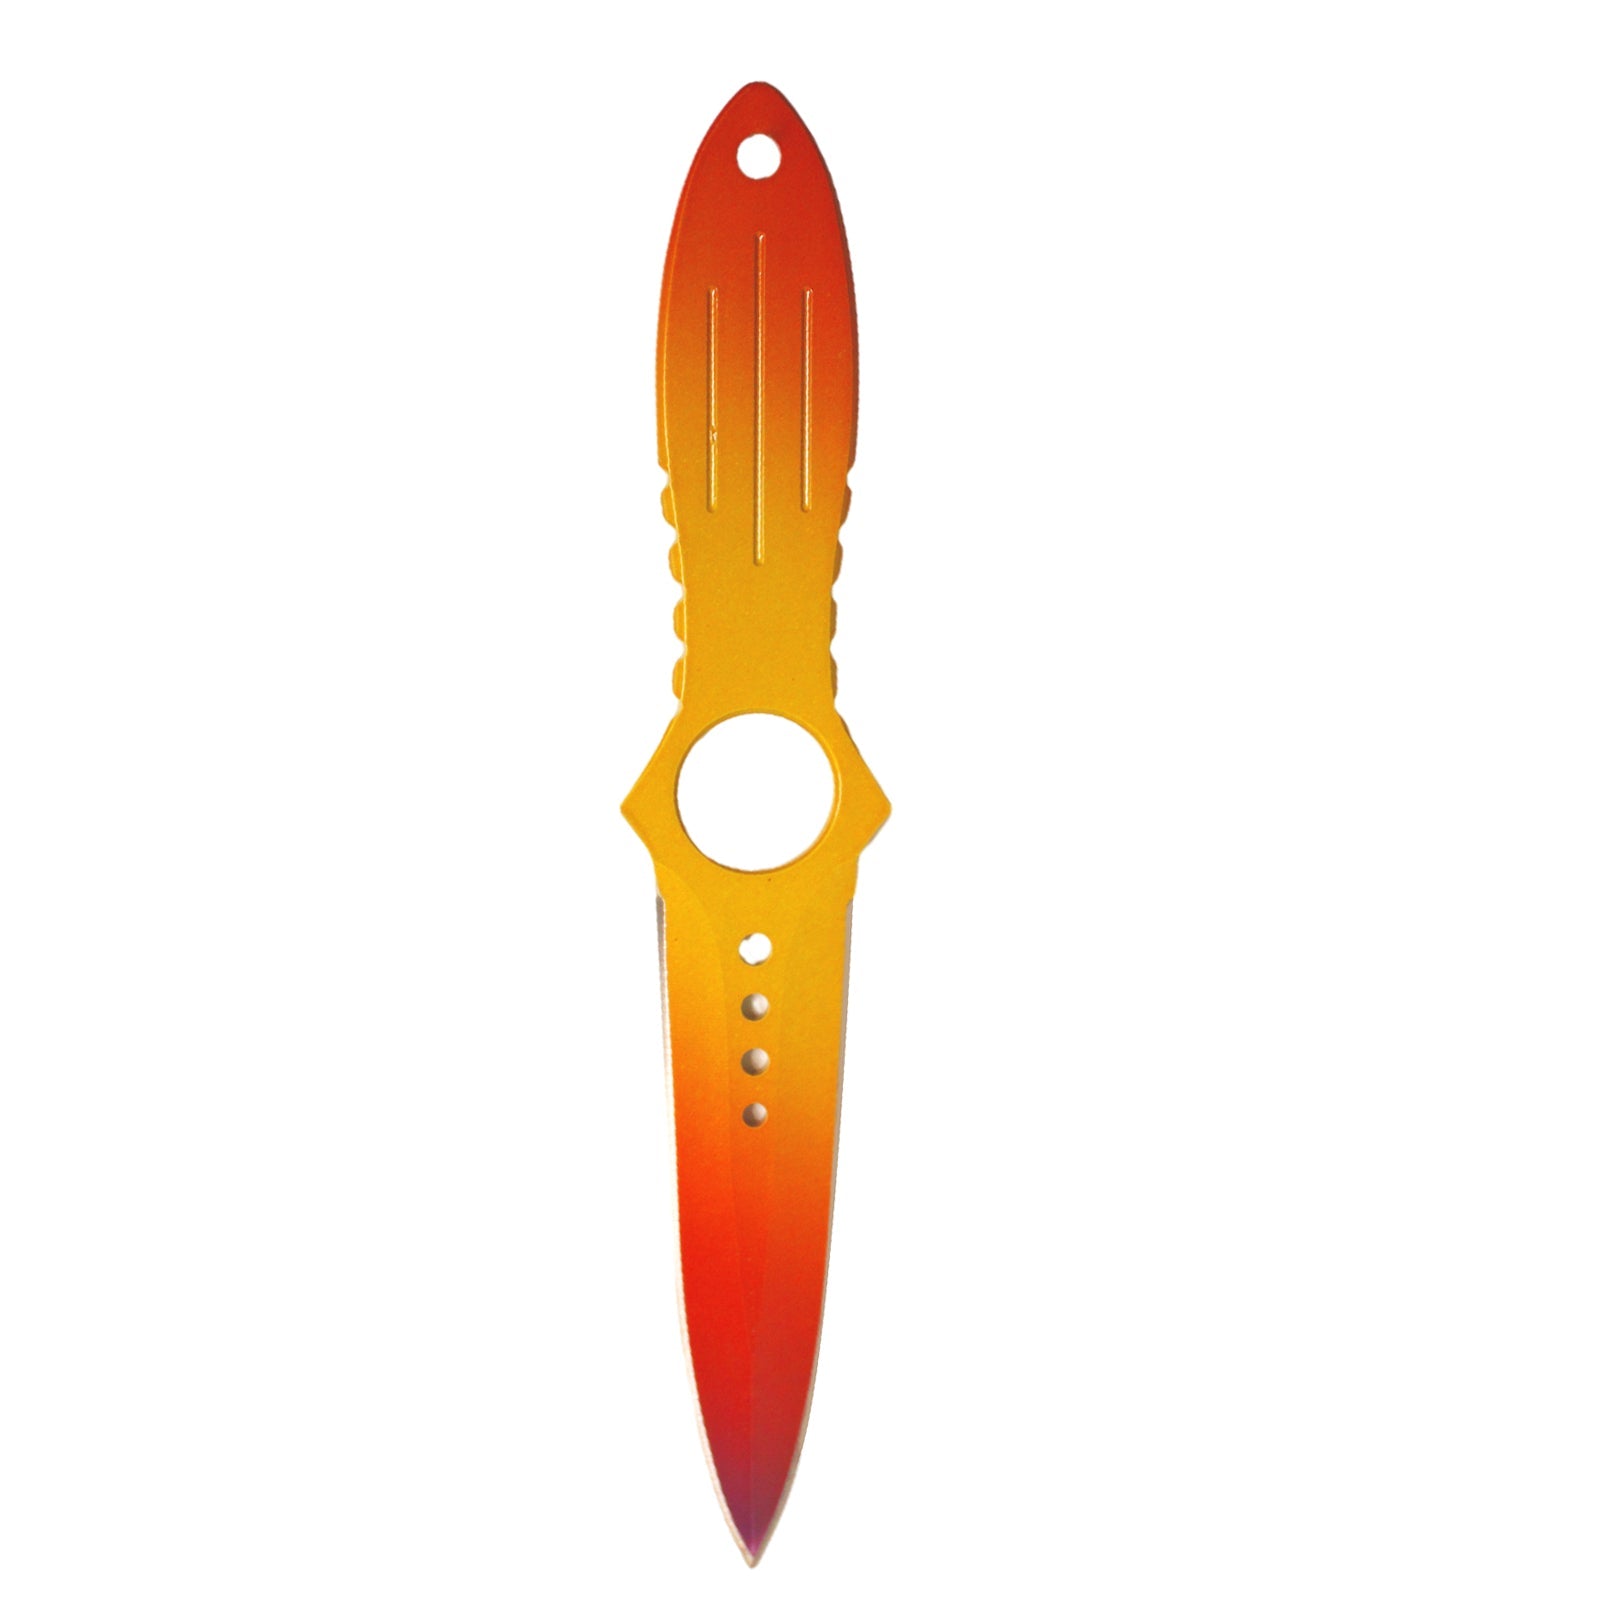 Andux Real Blade Skeleton Knife Balisong Gradient Color (ONLY Available in the United States)